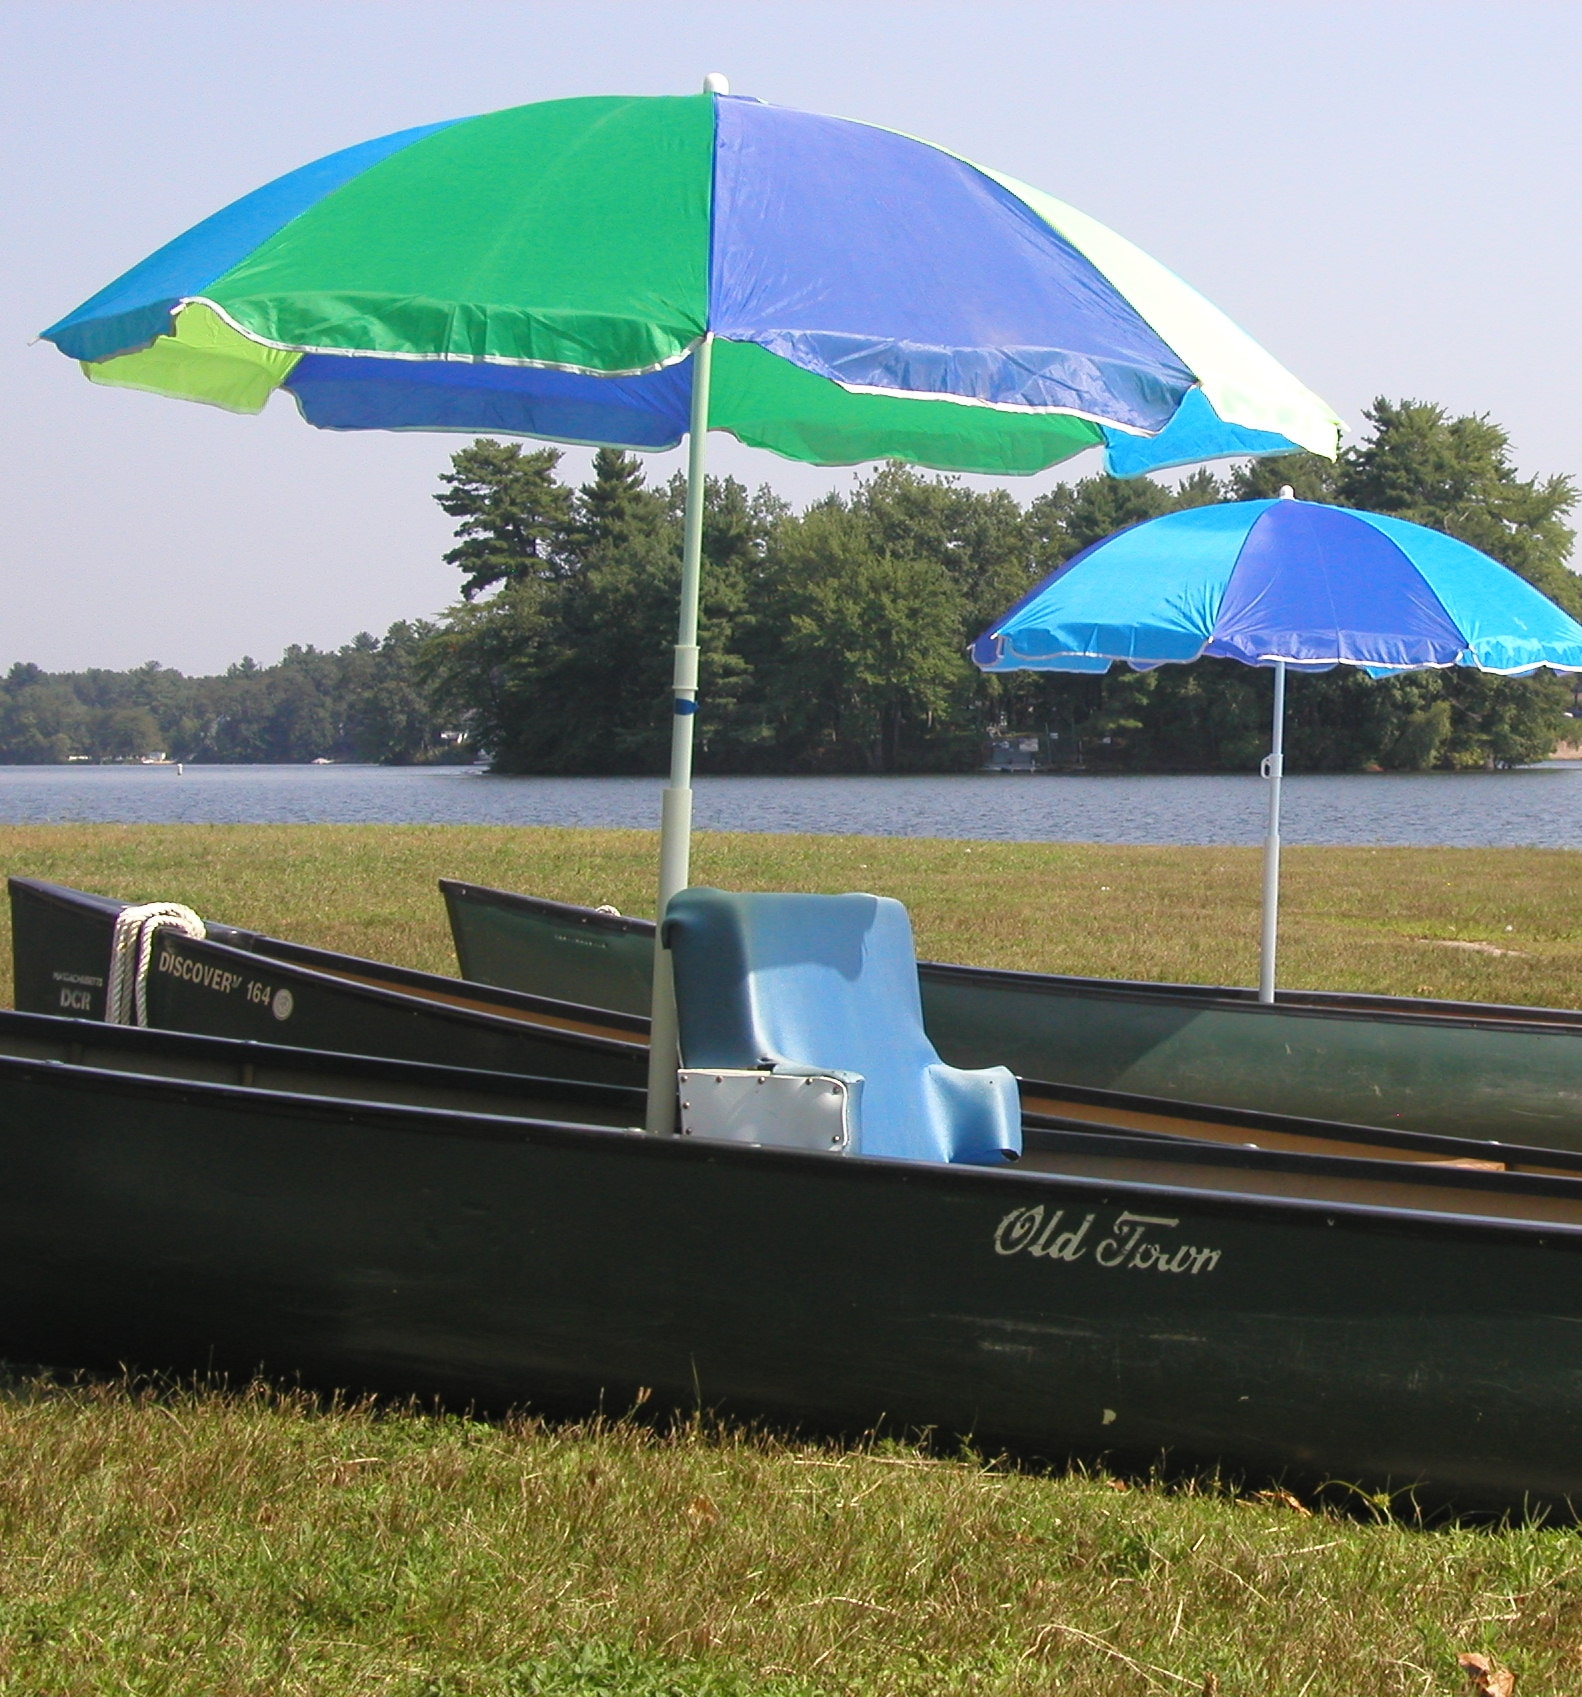 A padded seat sits in the bottom of a canoe on the shore. An umbrella is mounted over the seat.